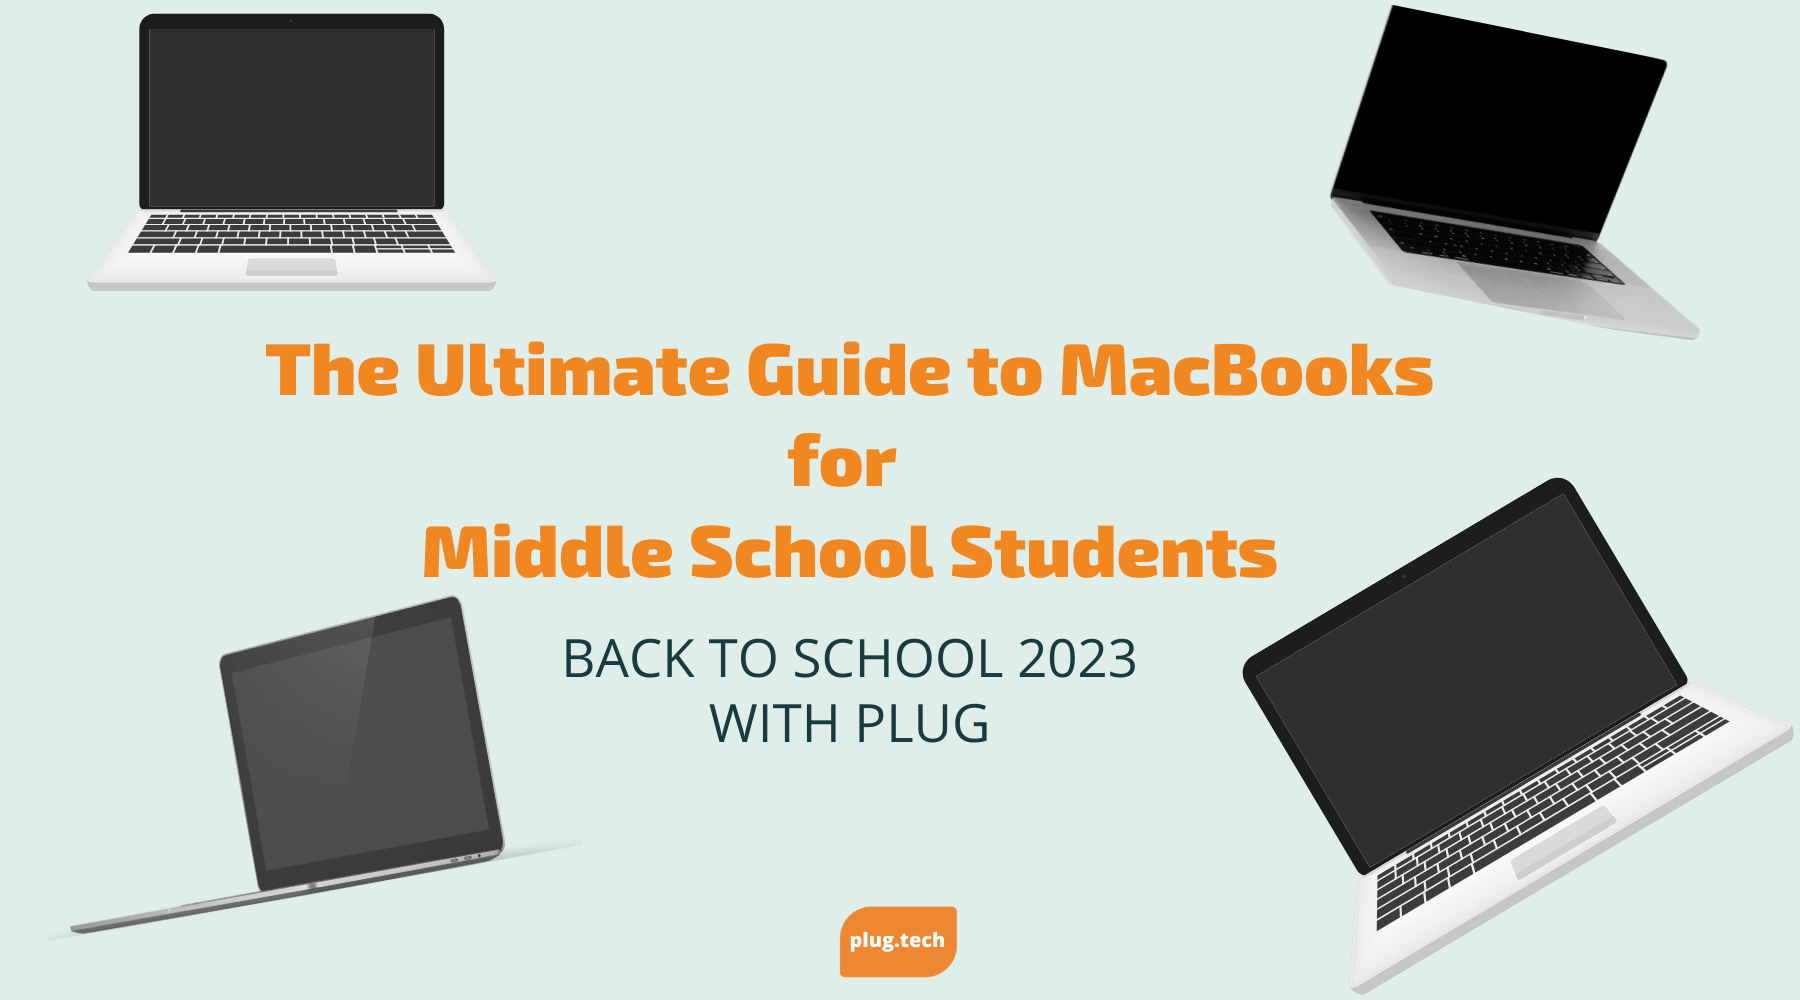 The Ultimate Guide to MacBooks for Middle School Students